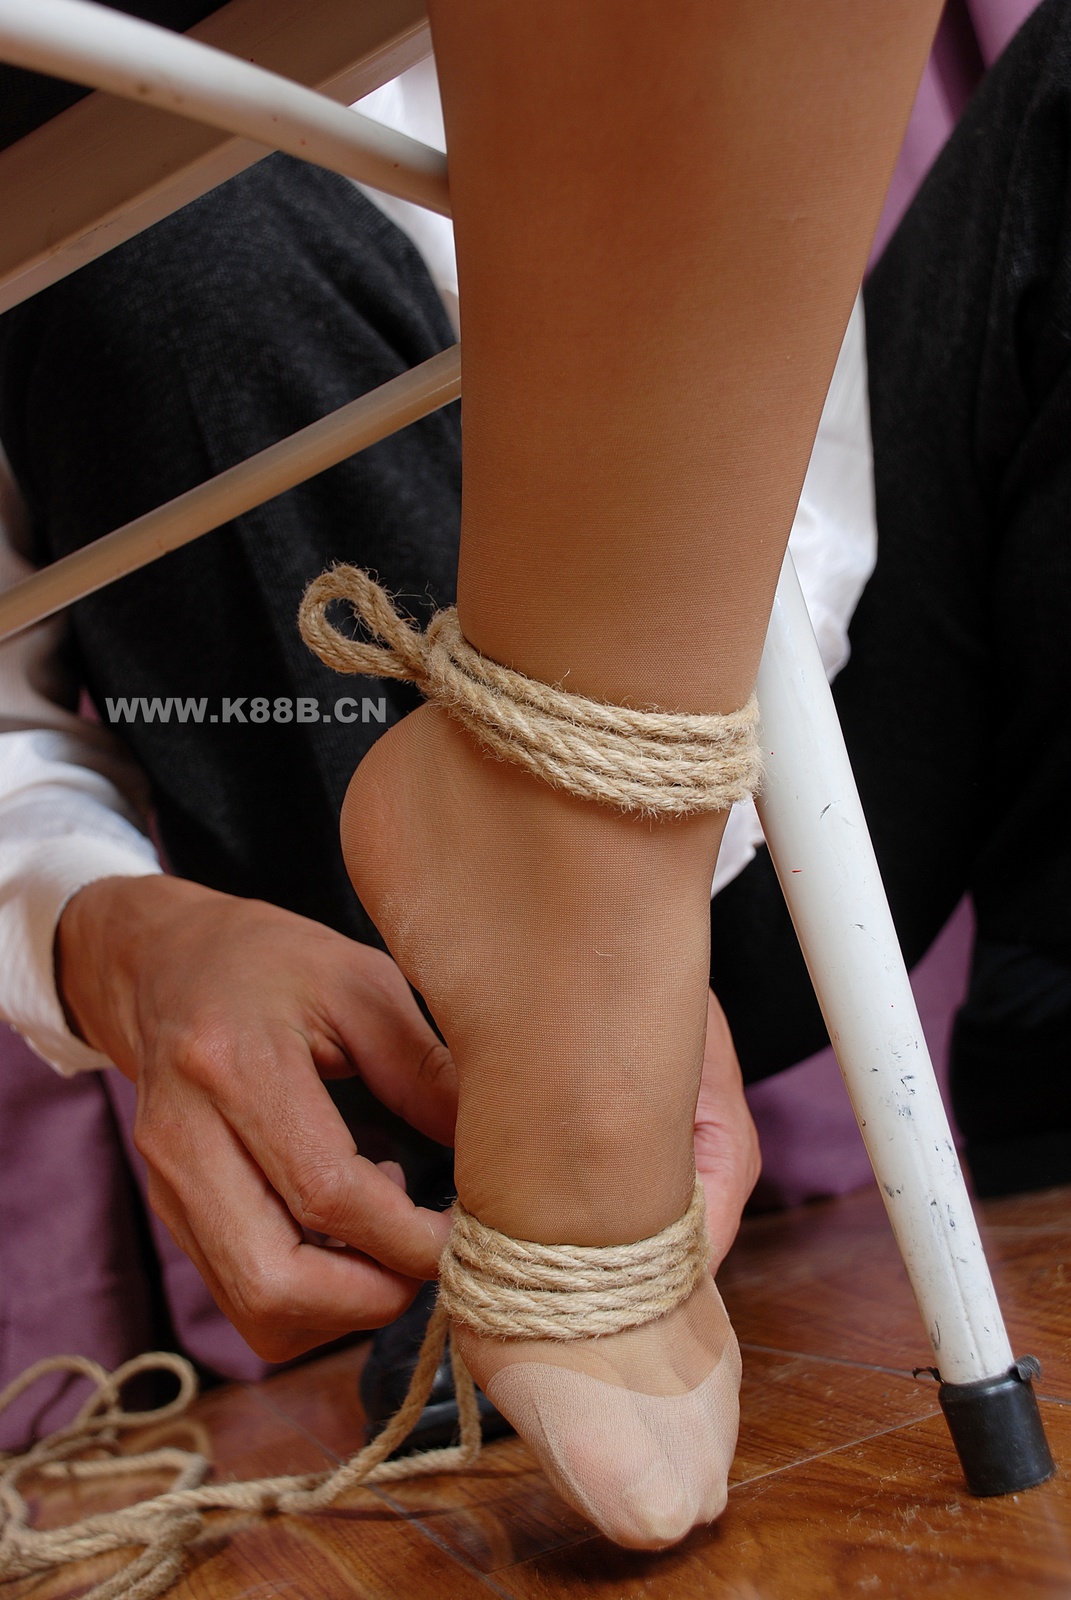 Chinese Rope Model 423